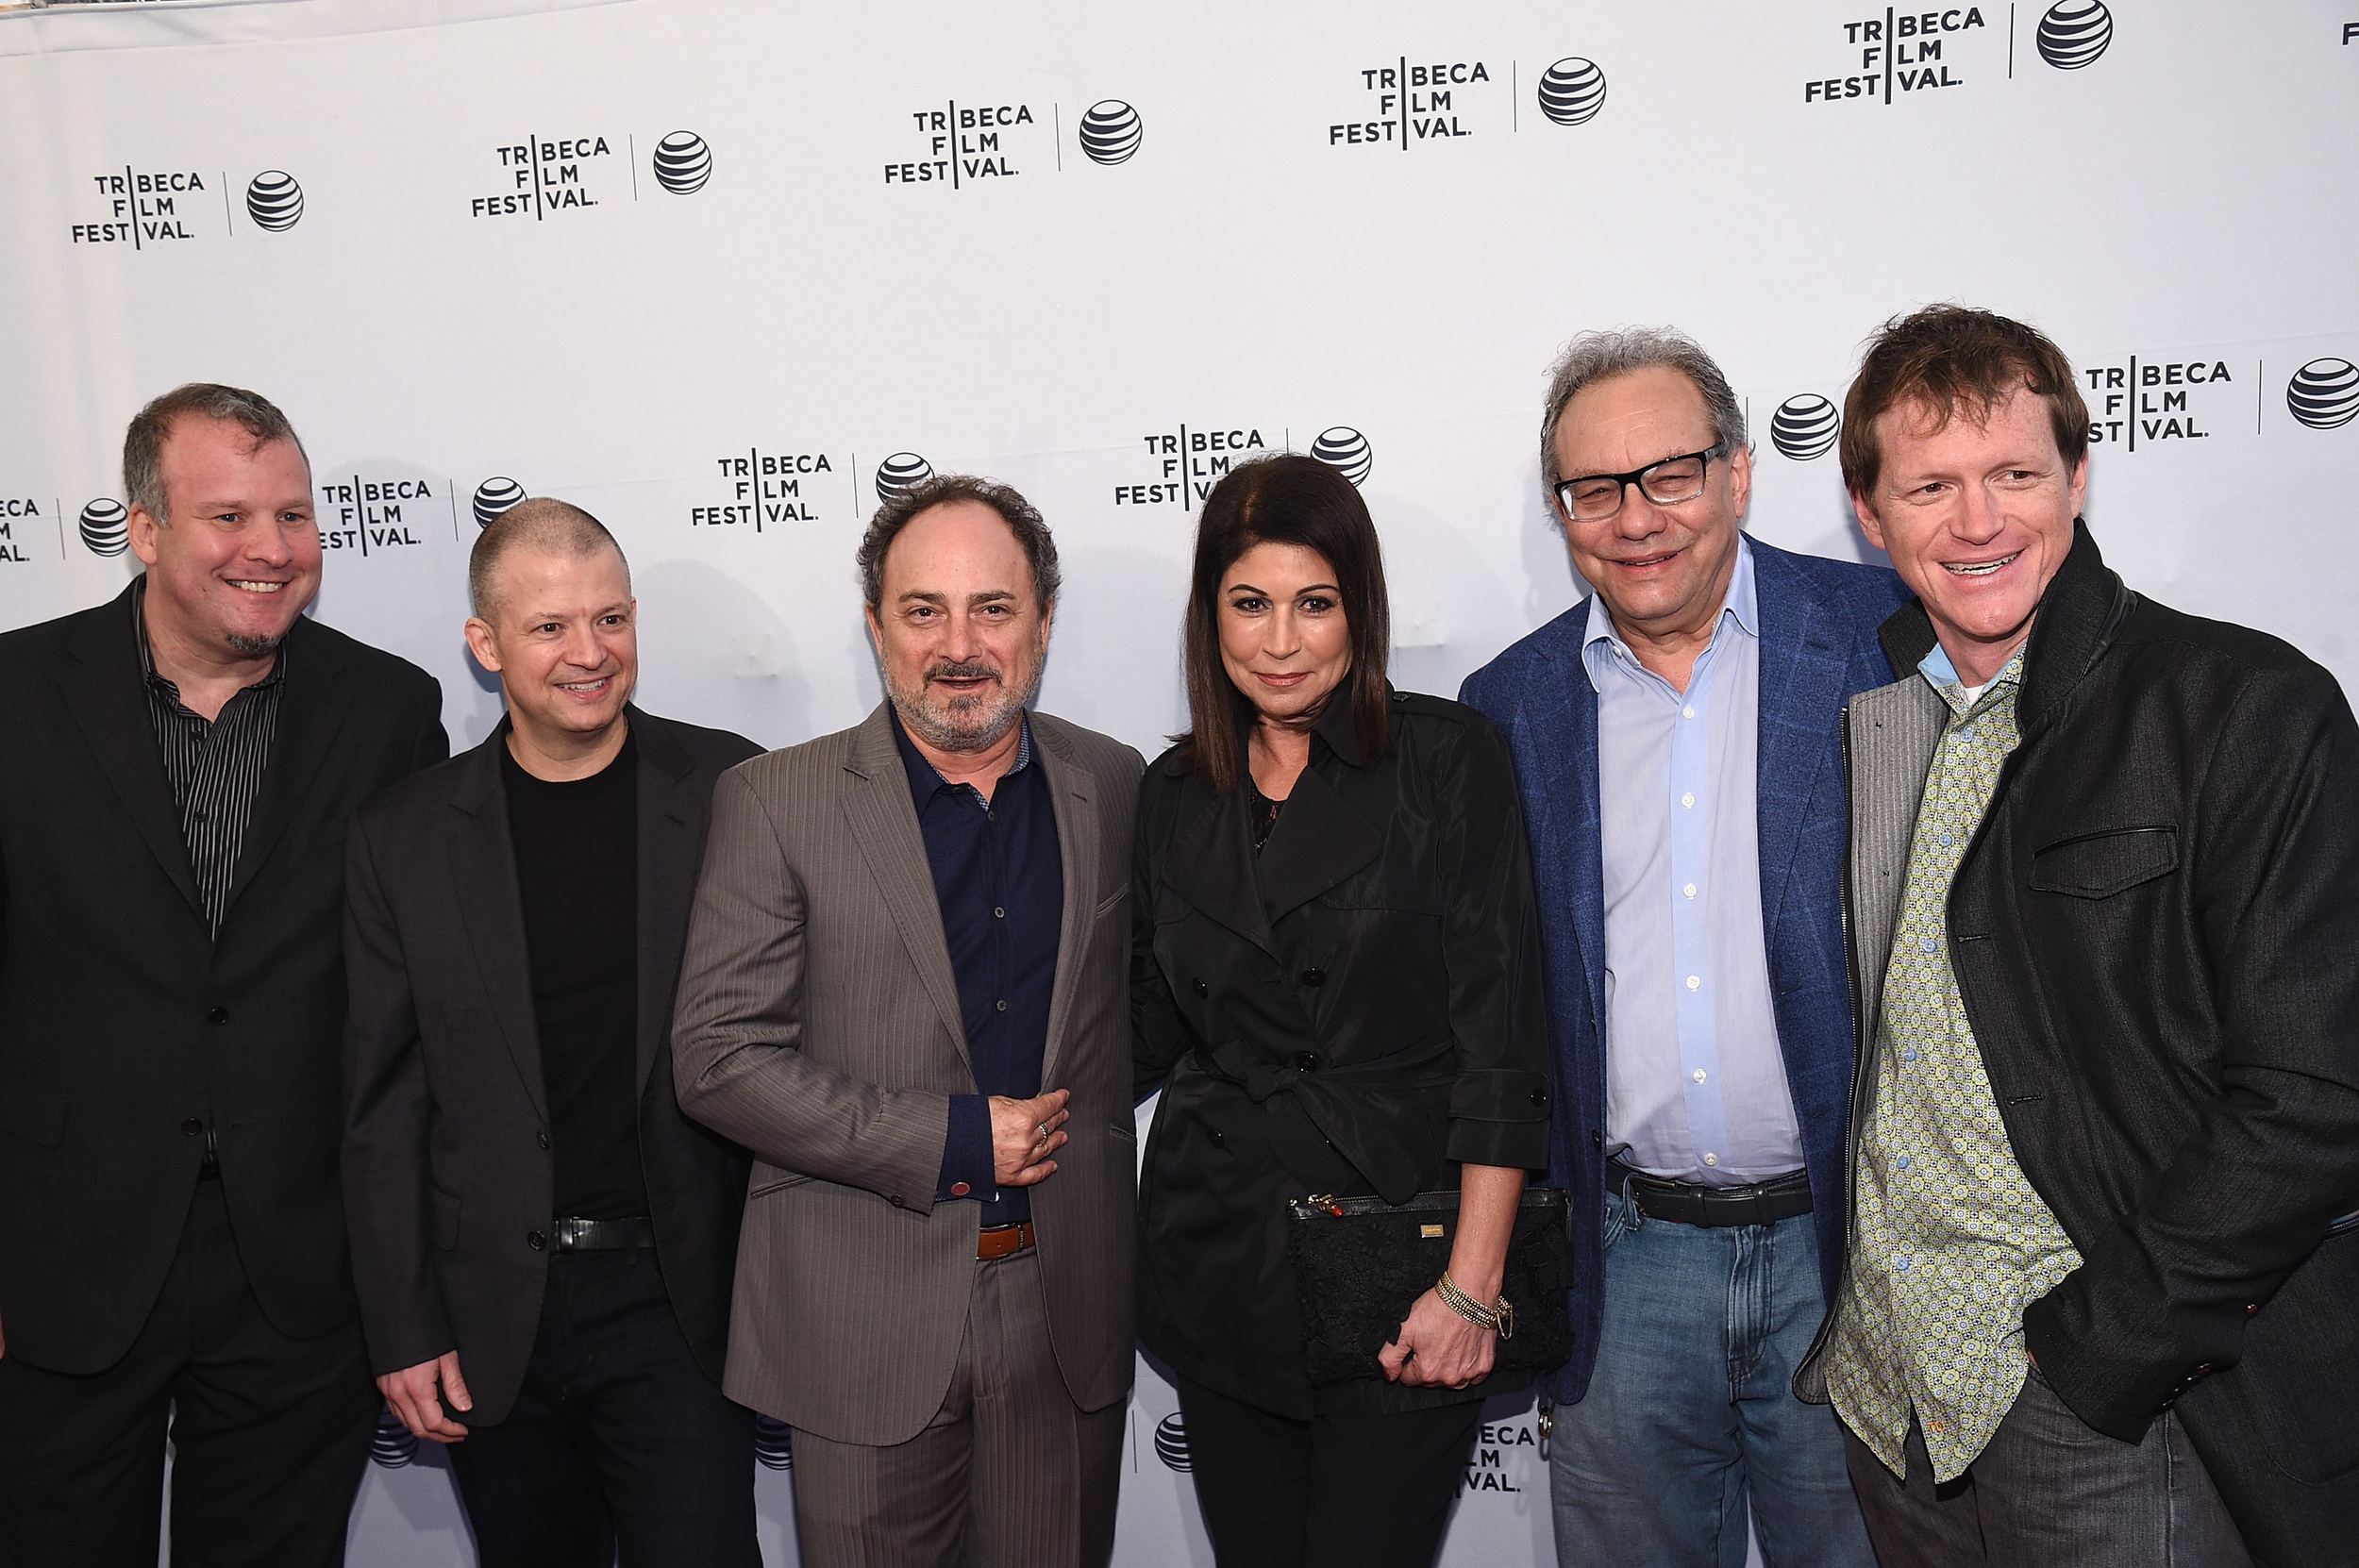   NEW YORK, NY - APRIL 22: (L-R): Gregory Segal, Jim Norton, Kevin Pollak, Caroline Hirsch, Lewis Black and Burton Ritchie  &nbsp;  (Photo by Bryan Bedder/Getty Images for American Express)  